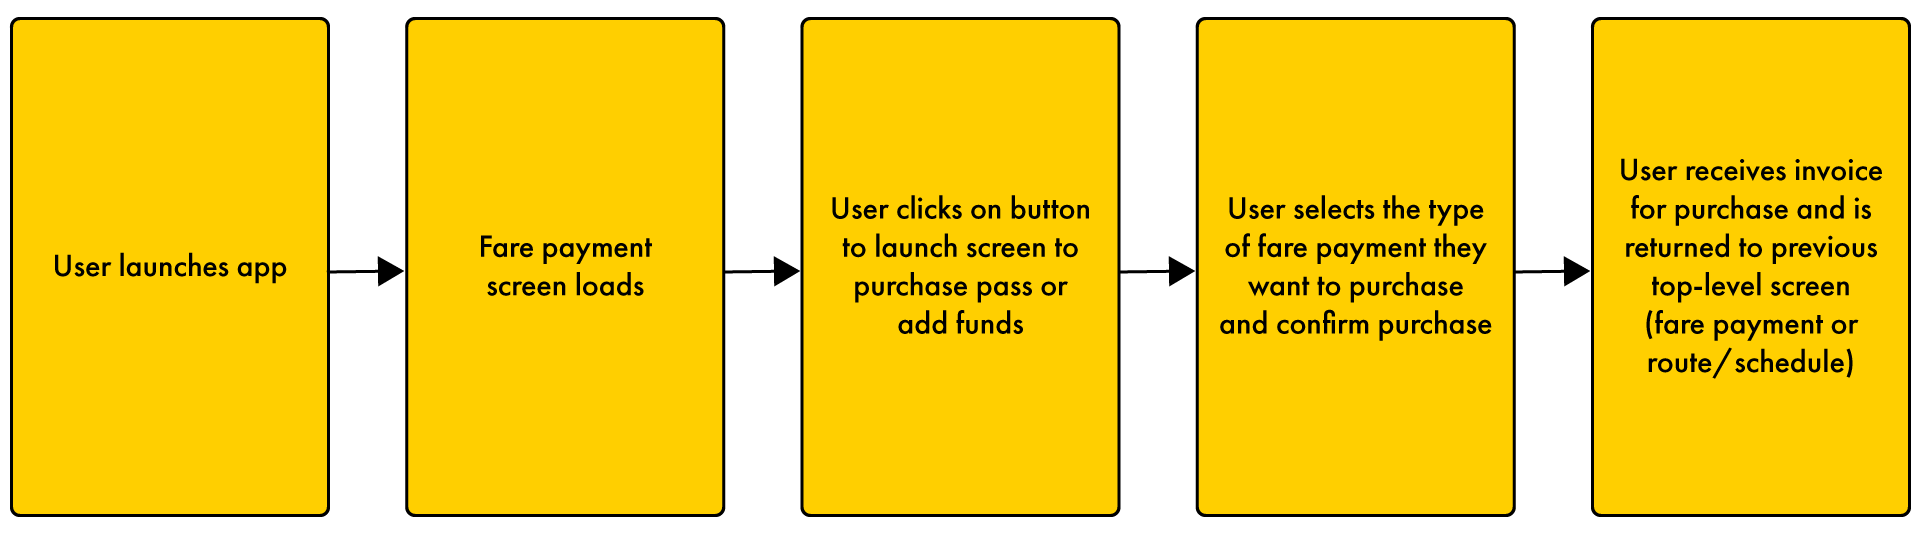 UX User Flow - Purchase New Pass or Add Funds